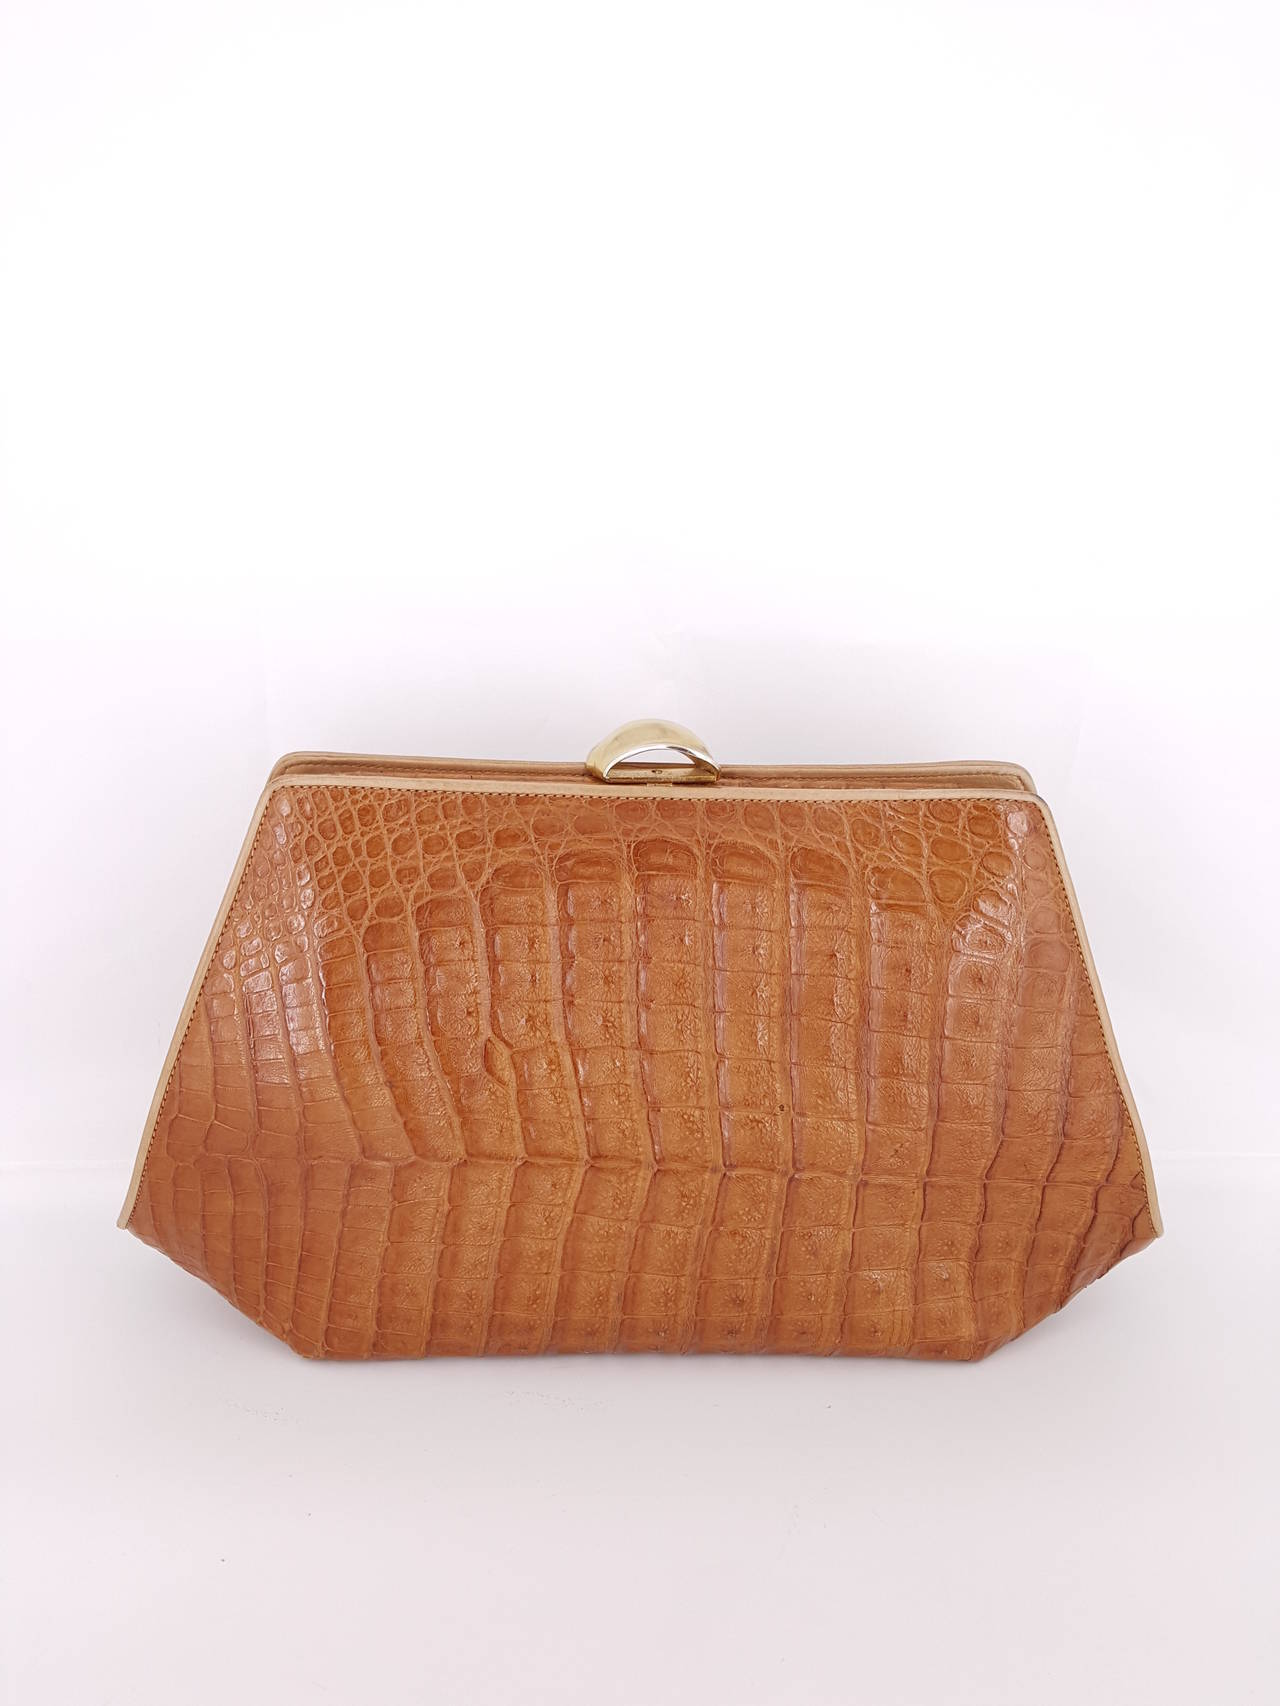 Offered for sale is this large vintage Donna Karan of New York Caiman crocodile clutch in a beautiful rich golden beige color. The outside edges are trimmed in a light tan leather.  This clutch is in exceptional condition and very rare.  It has a